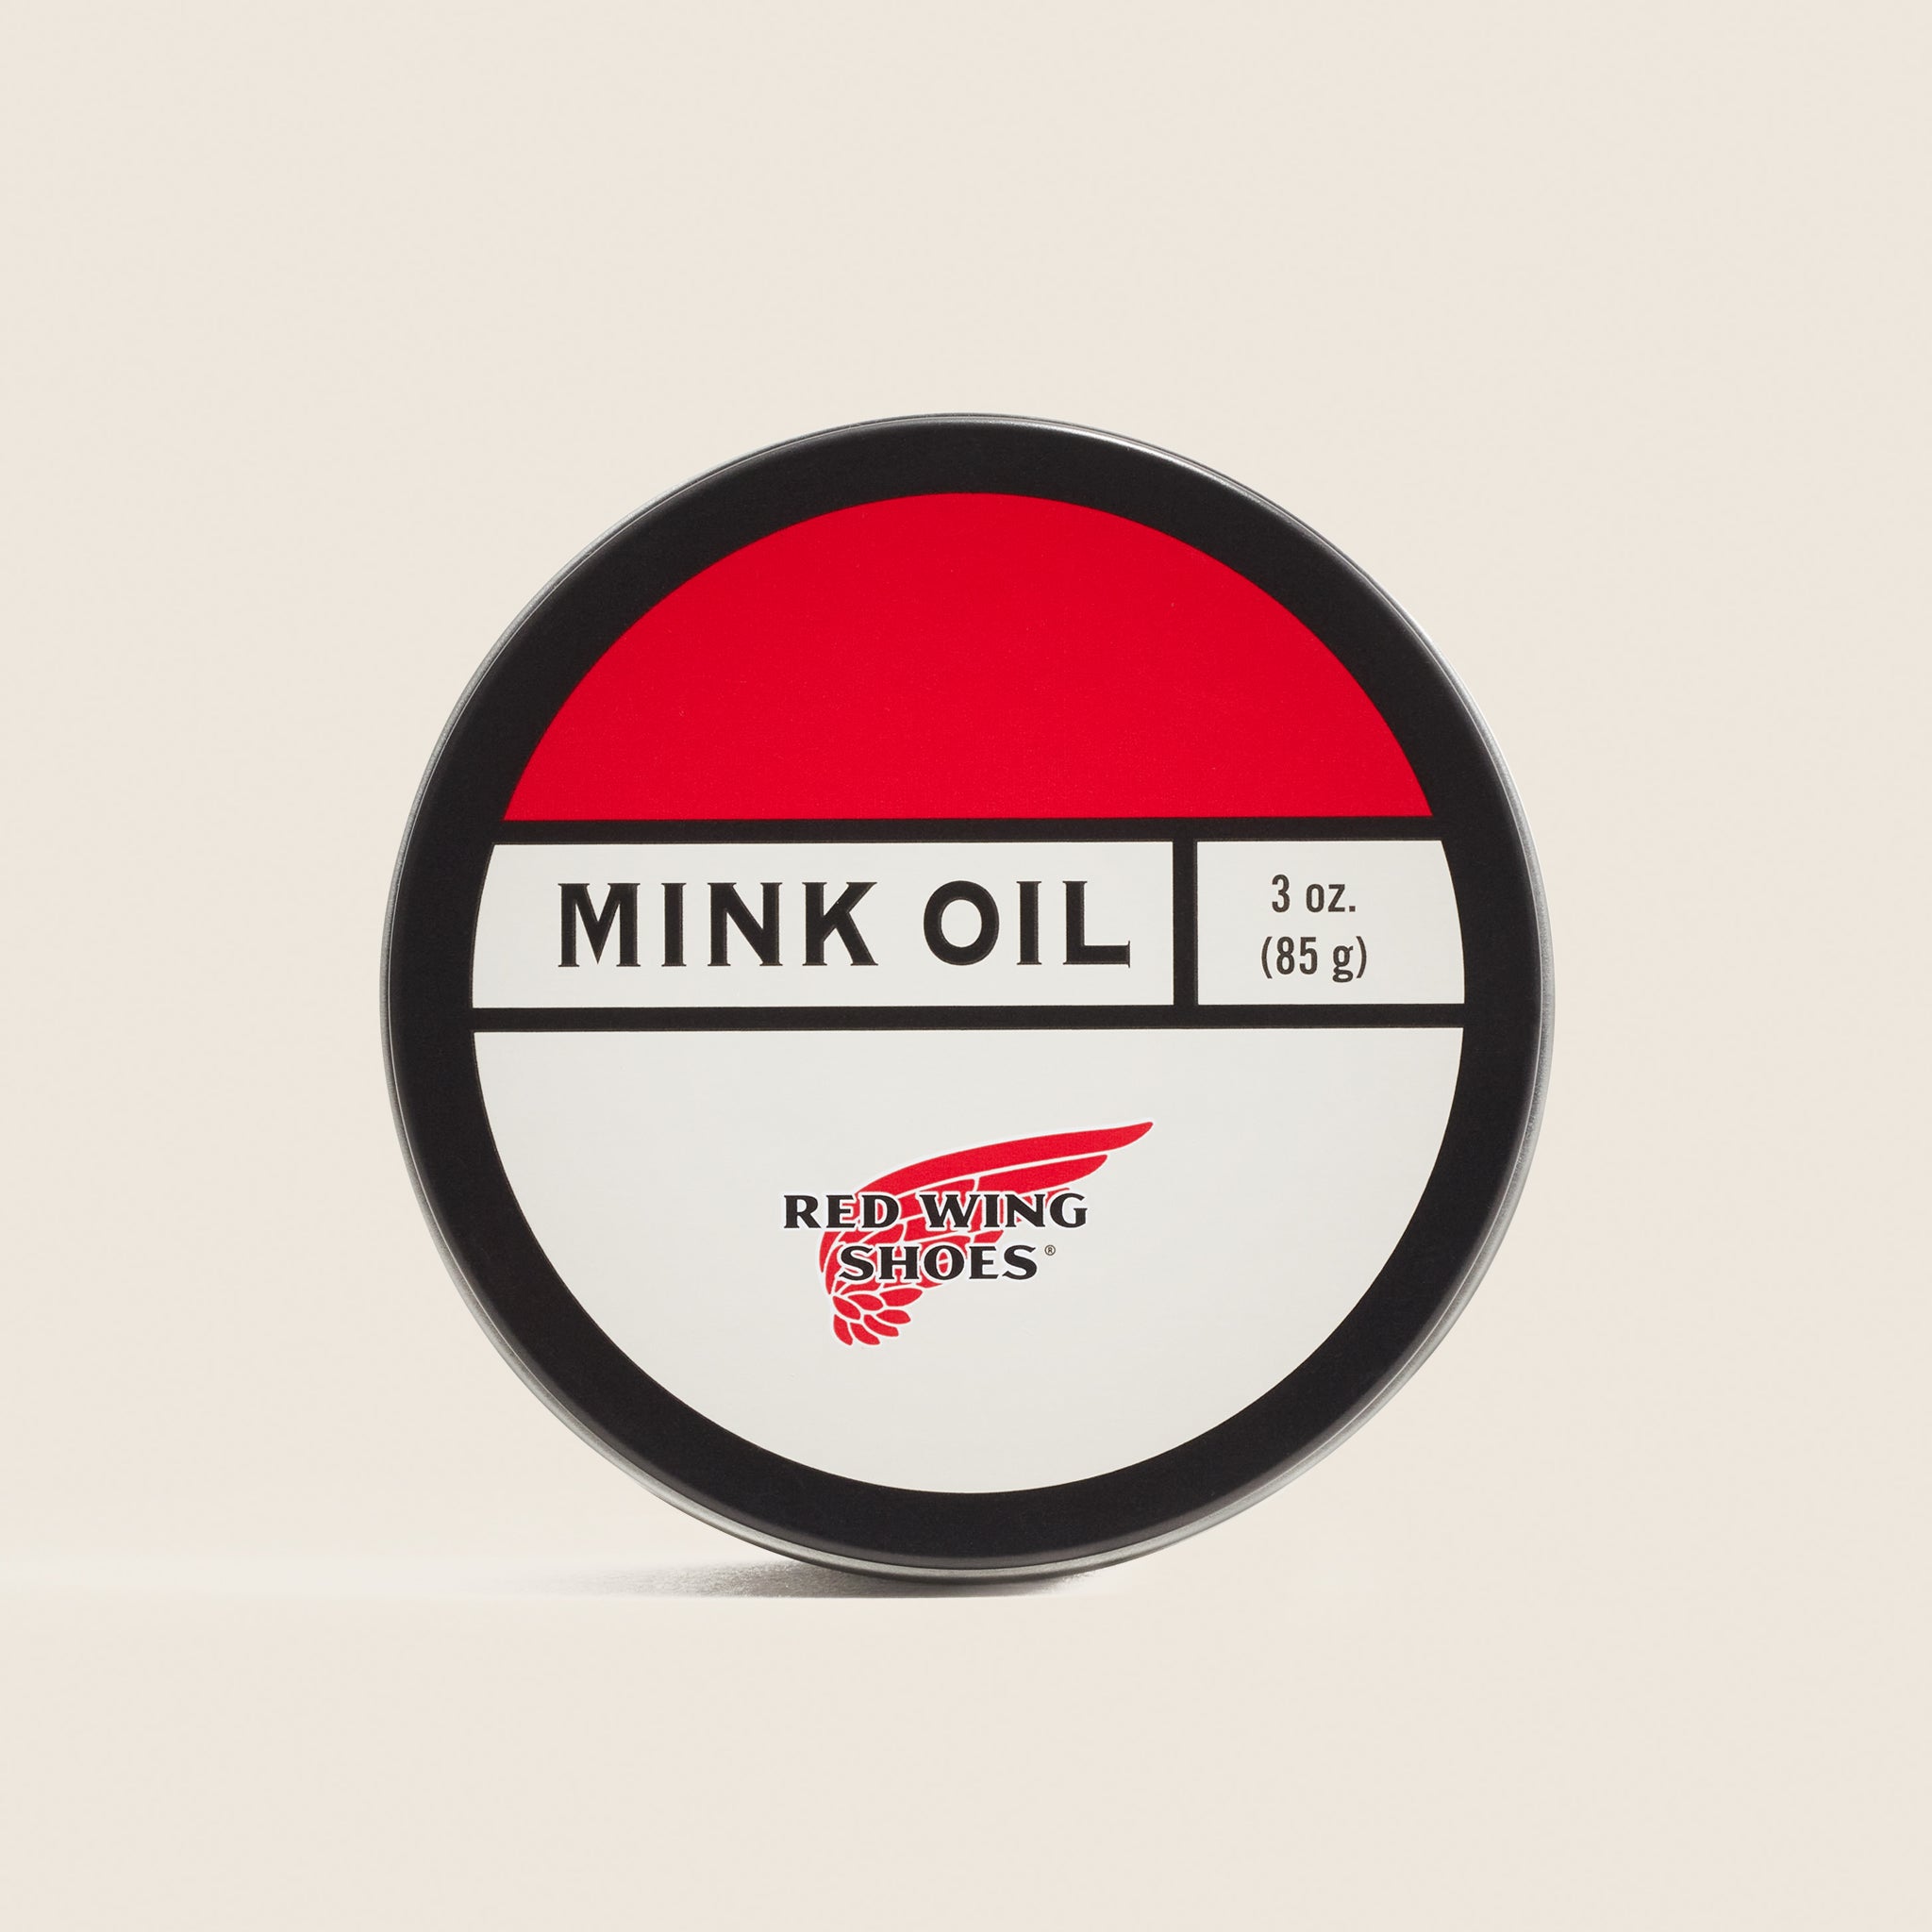 Red Wing Mink Oil care product | Red Wing London London